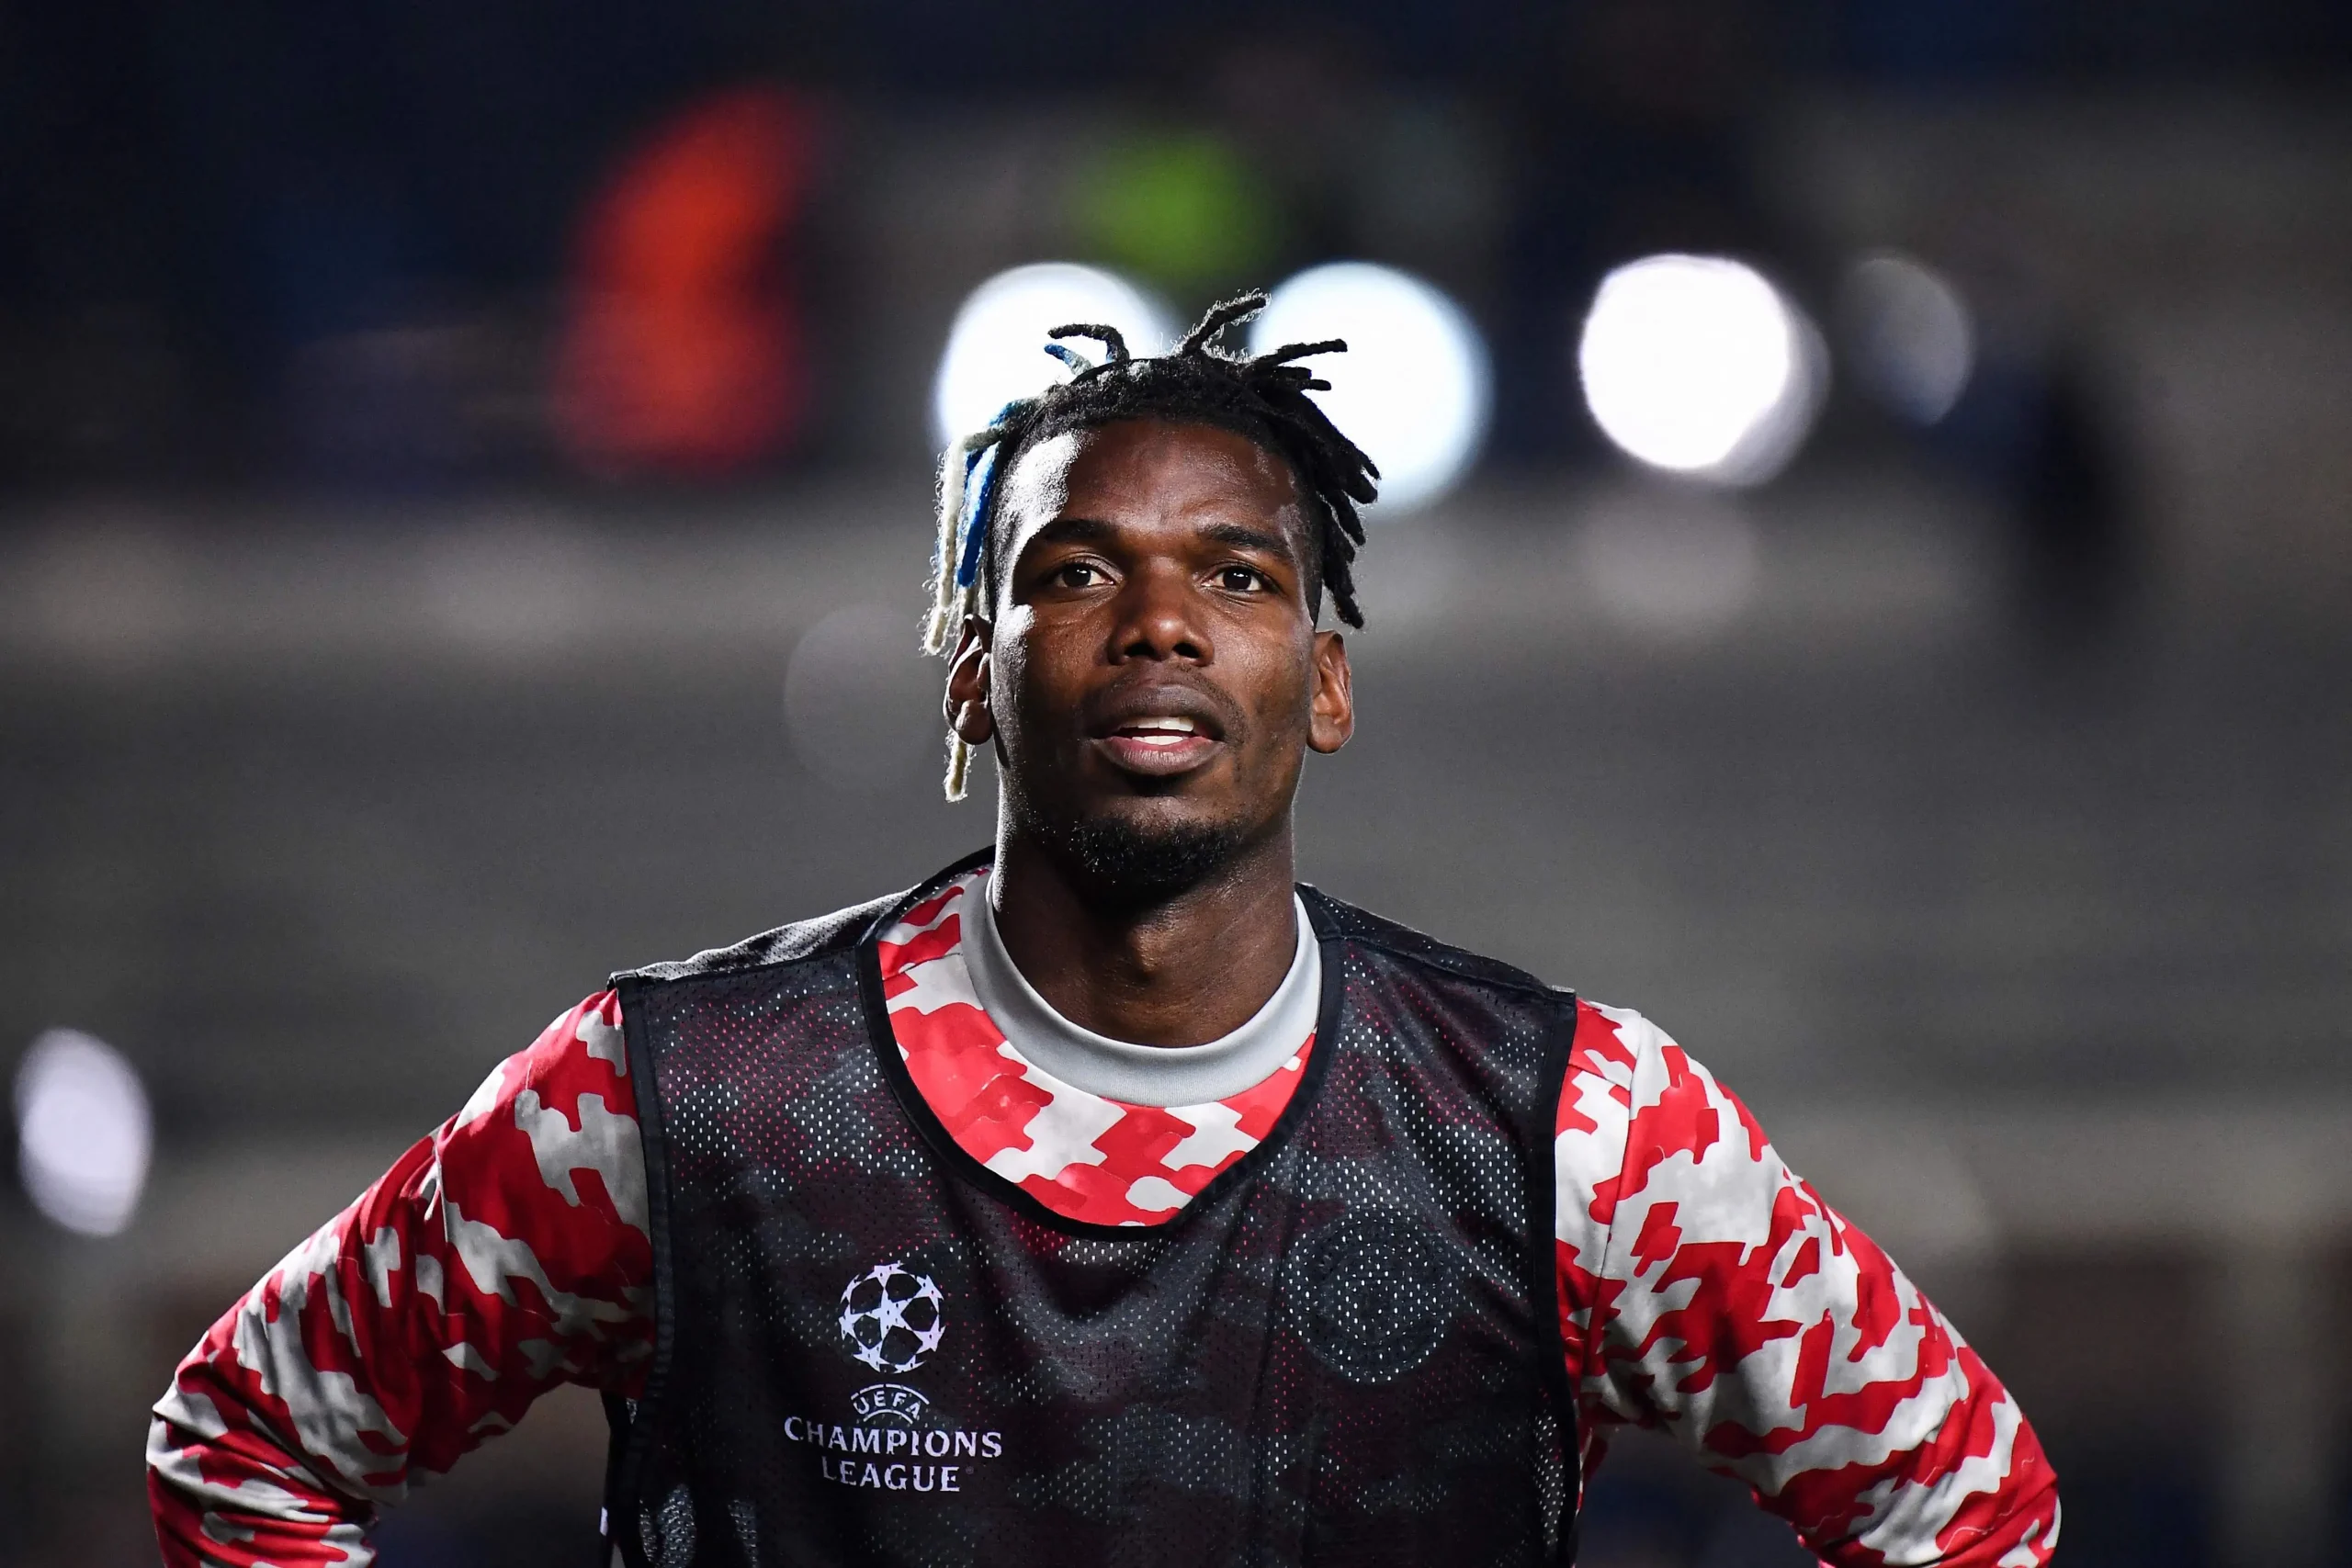 Man United Offer Mouth-watering Contract To Paul Pogba Amid Madrid, Juve And PSG Interest